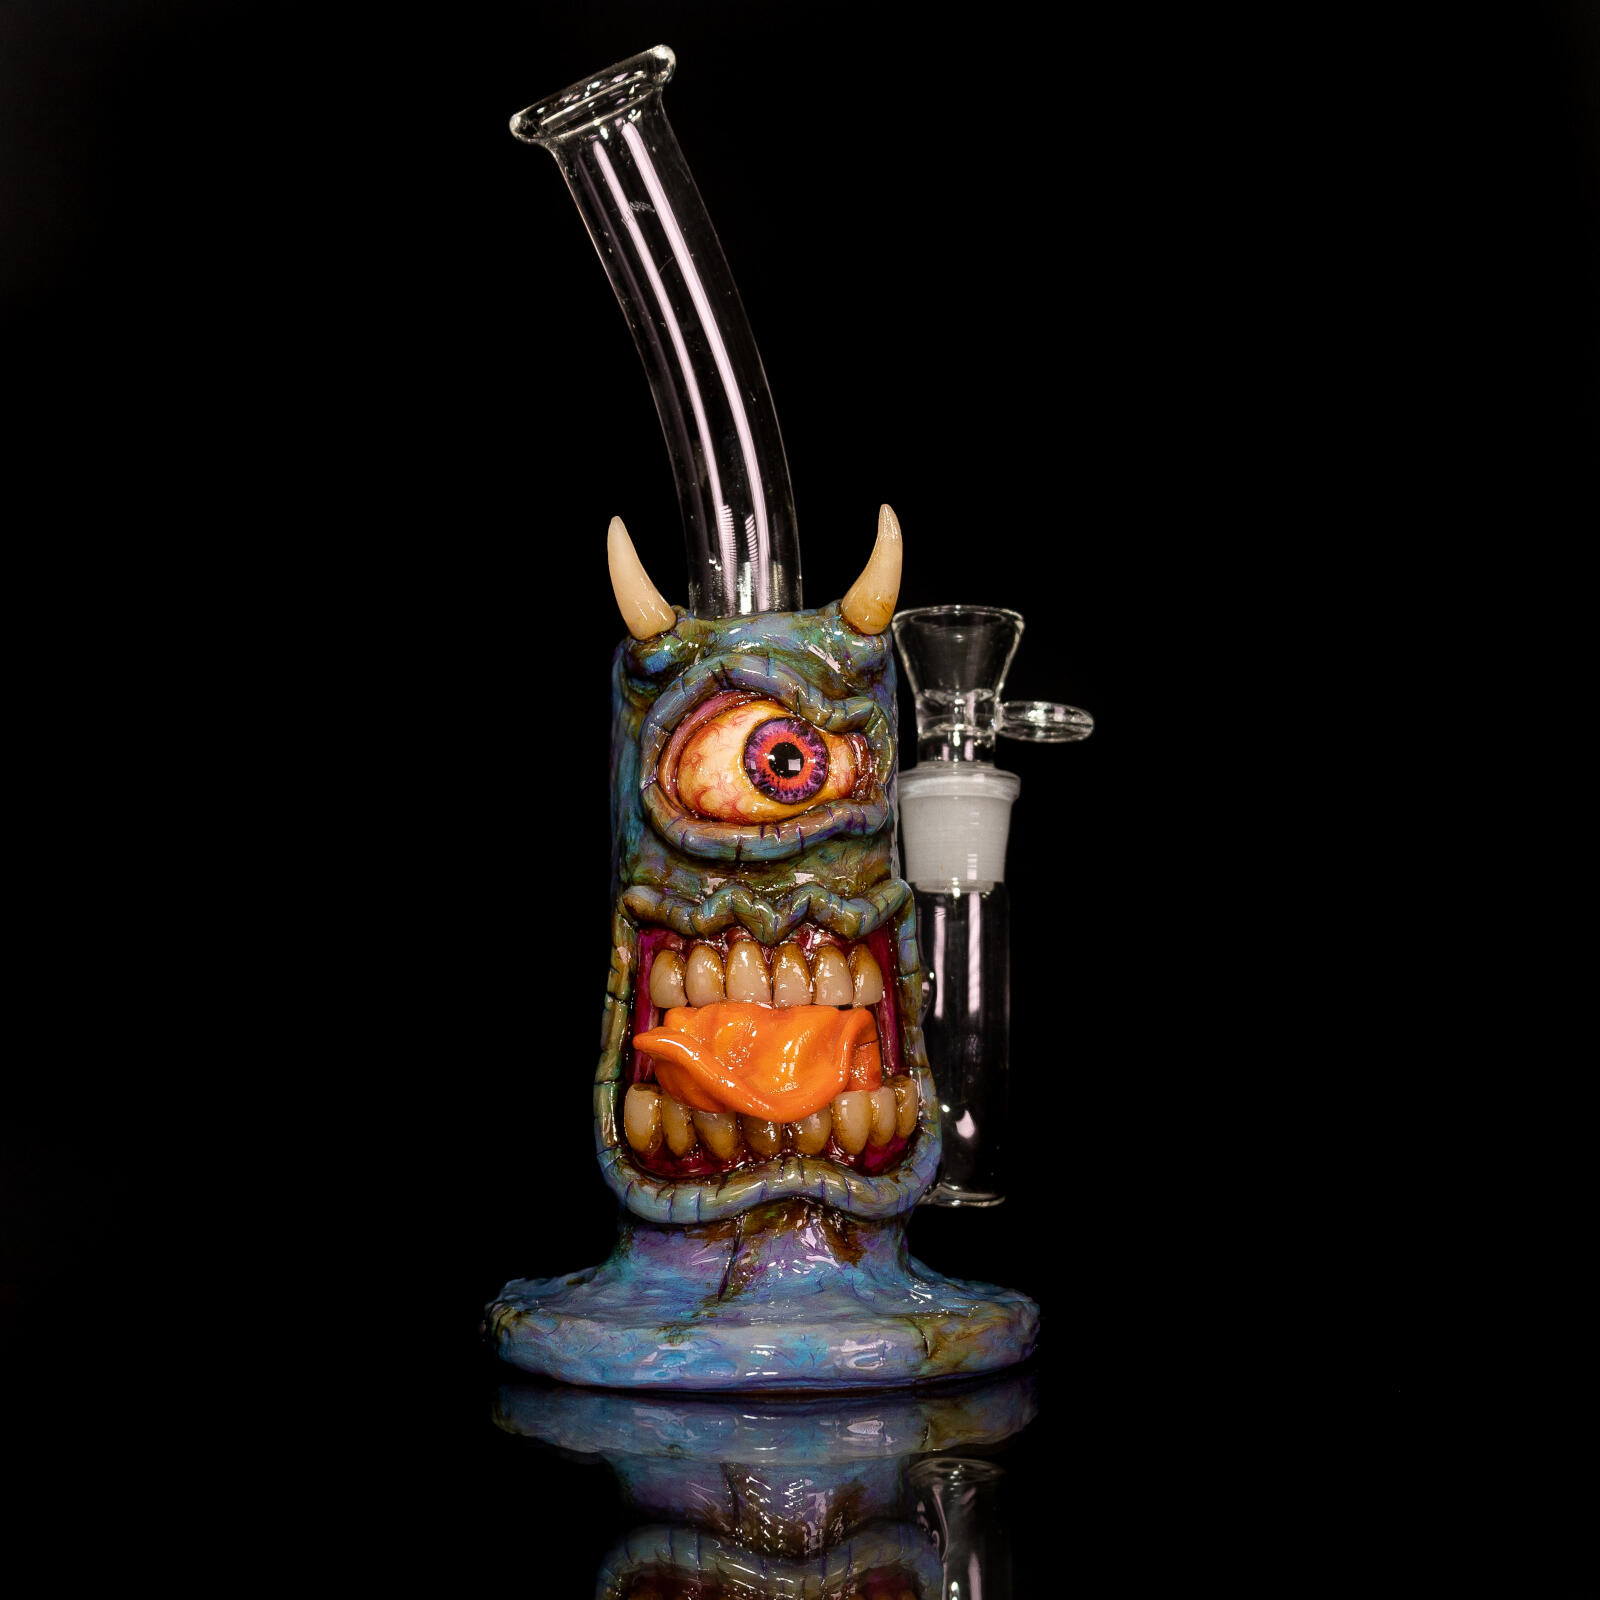 Blue Demon with Tongue Rig